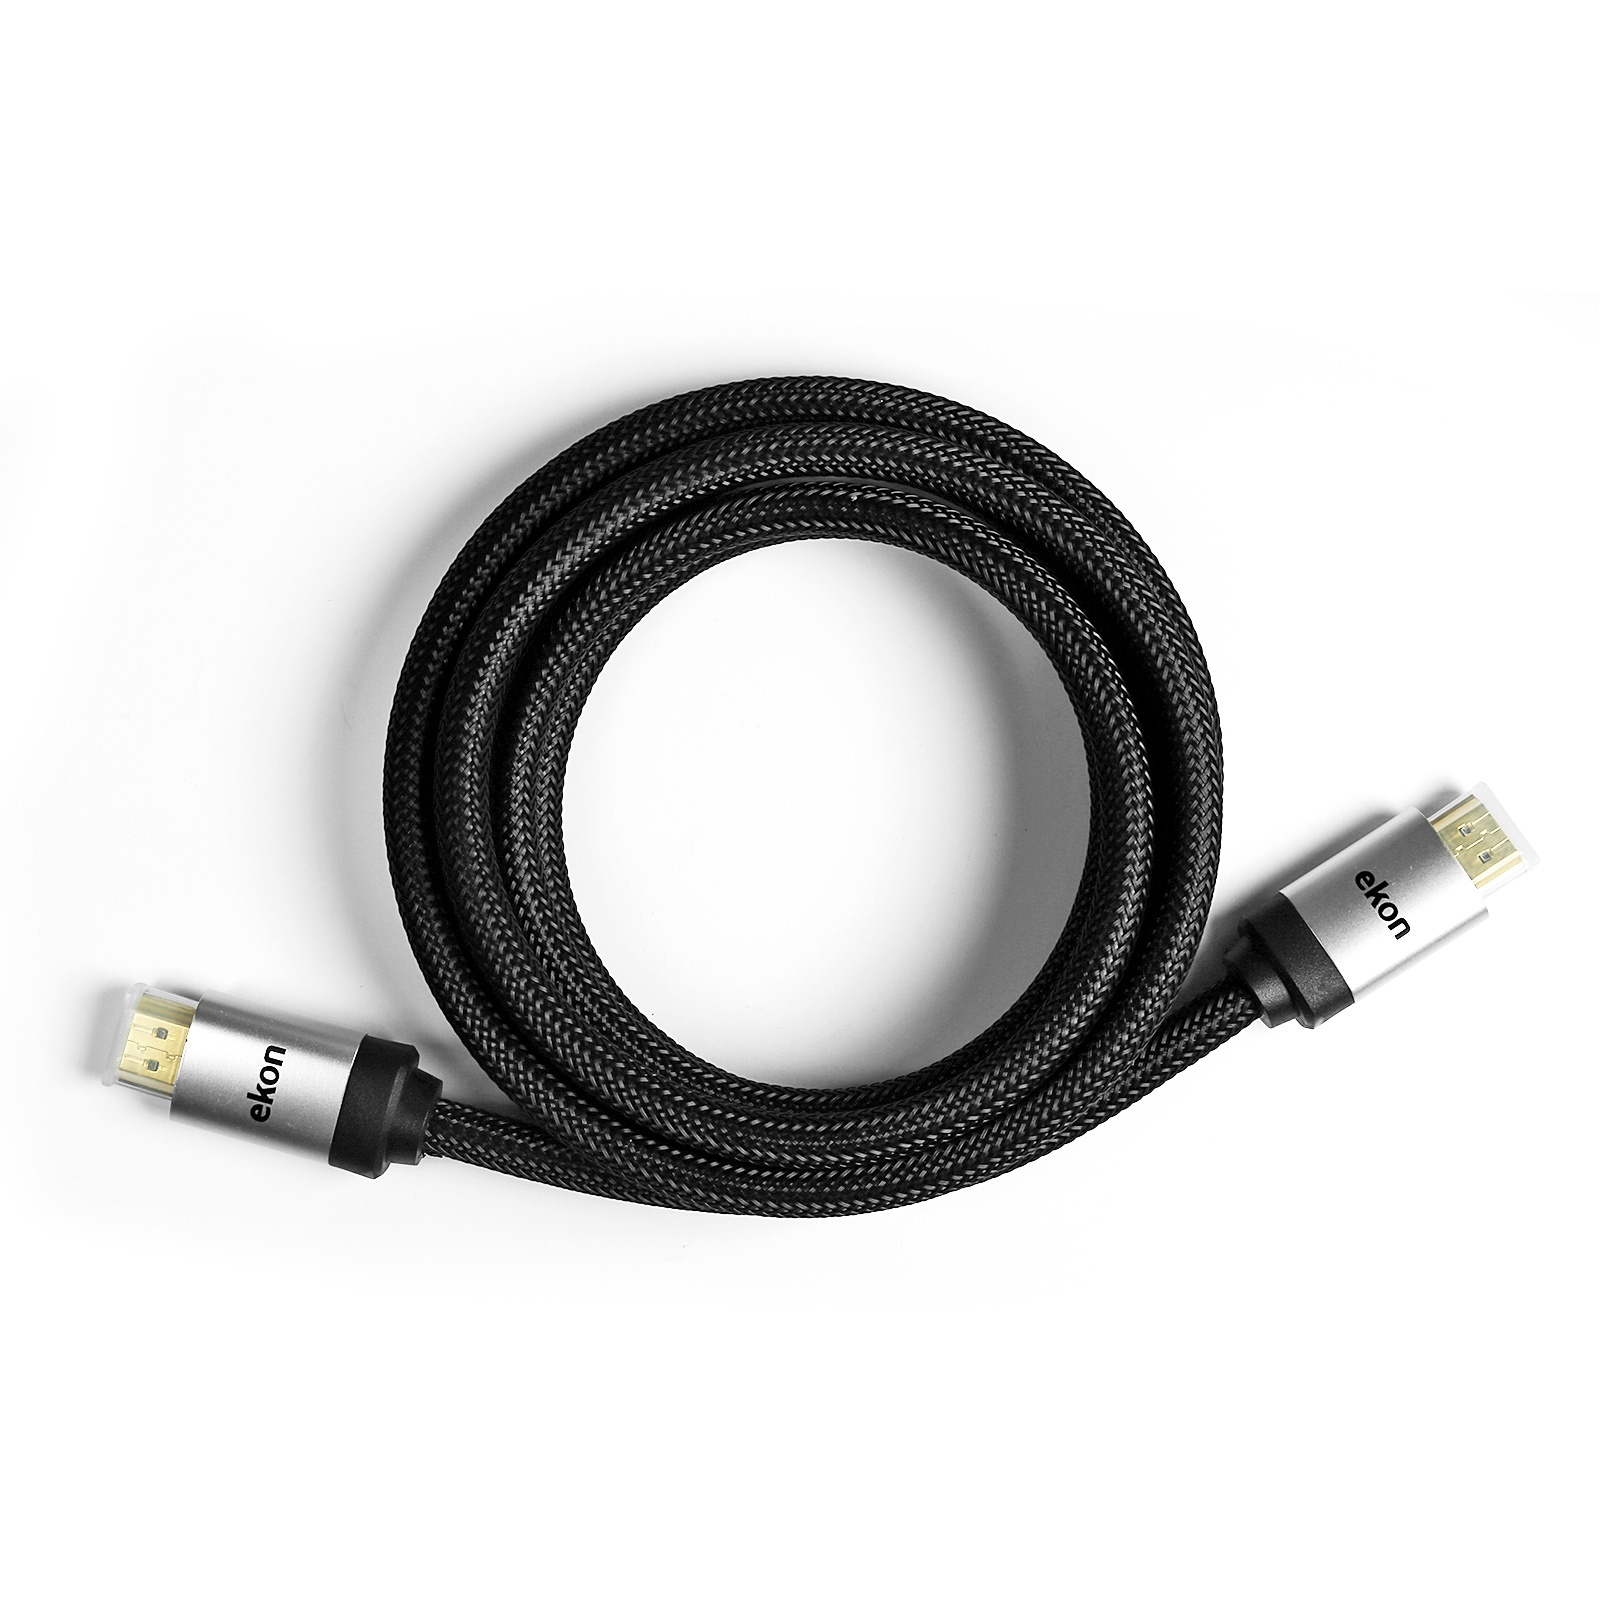 EKON HDMI V 2.0 cable male to male high speed with ethernet, 4K. OD 7.3mm.  Conductor pure copper,28 AWG, jacket with cotton. Connector metal shell and gold plated. Shielding: Al-foil with al-mg braid. + ferrite core. Total Lenght 3,0 mt